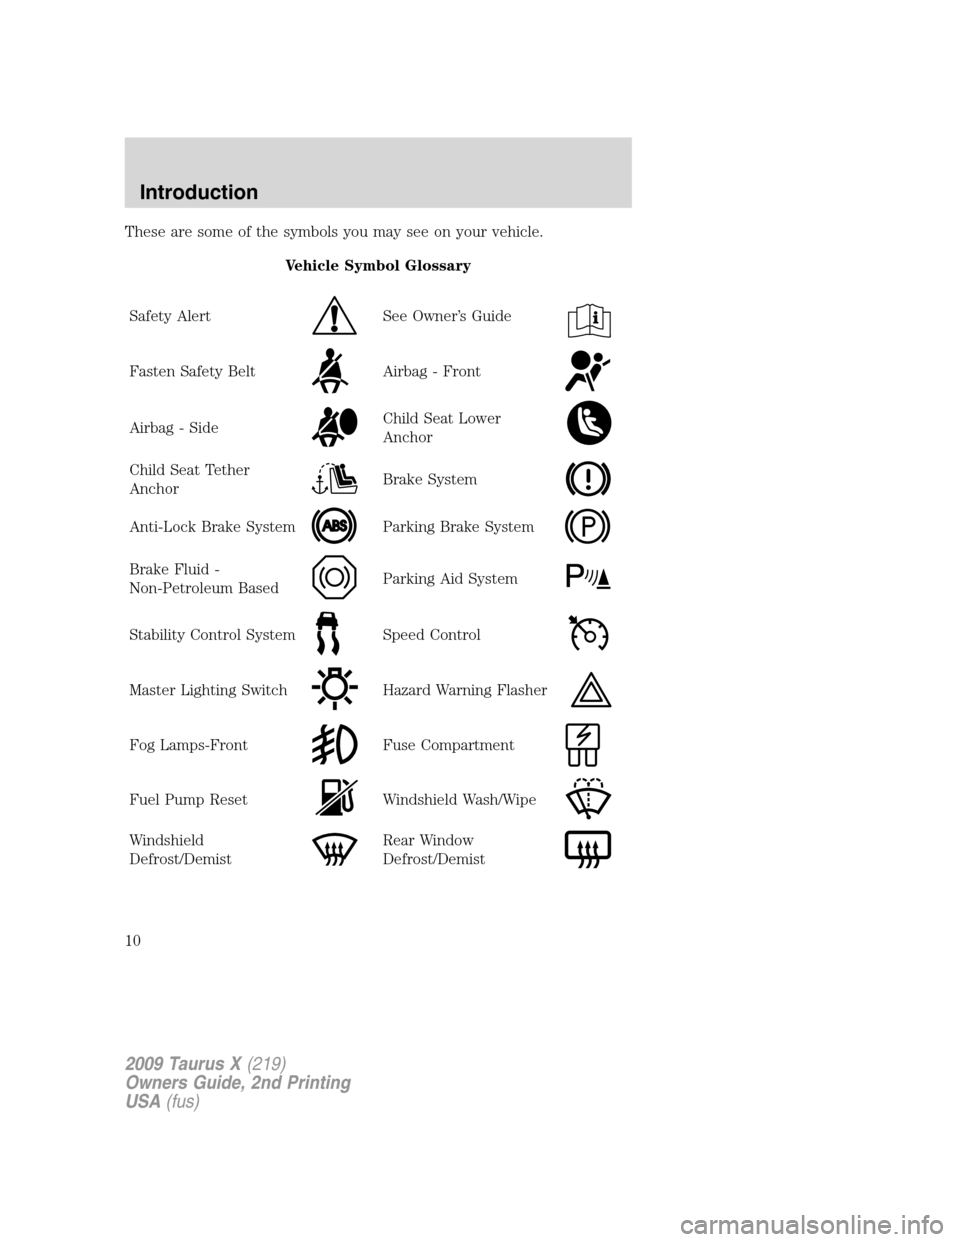 FORD TAURUS X 2009 1.G Owners Manual These are some of the symbols you may see on your vehicle.
Vehicle Symbol Glossary
Safety Alert
See Owner’s Guide
Fasten Safety BeltAirbag - Front
Airbag - SideChild Seat Lower
Anchor
Child Seat Tet